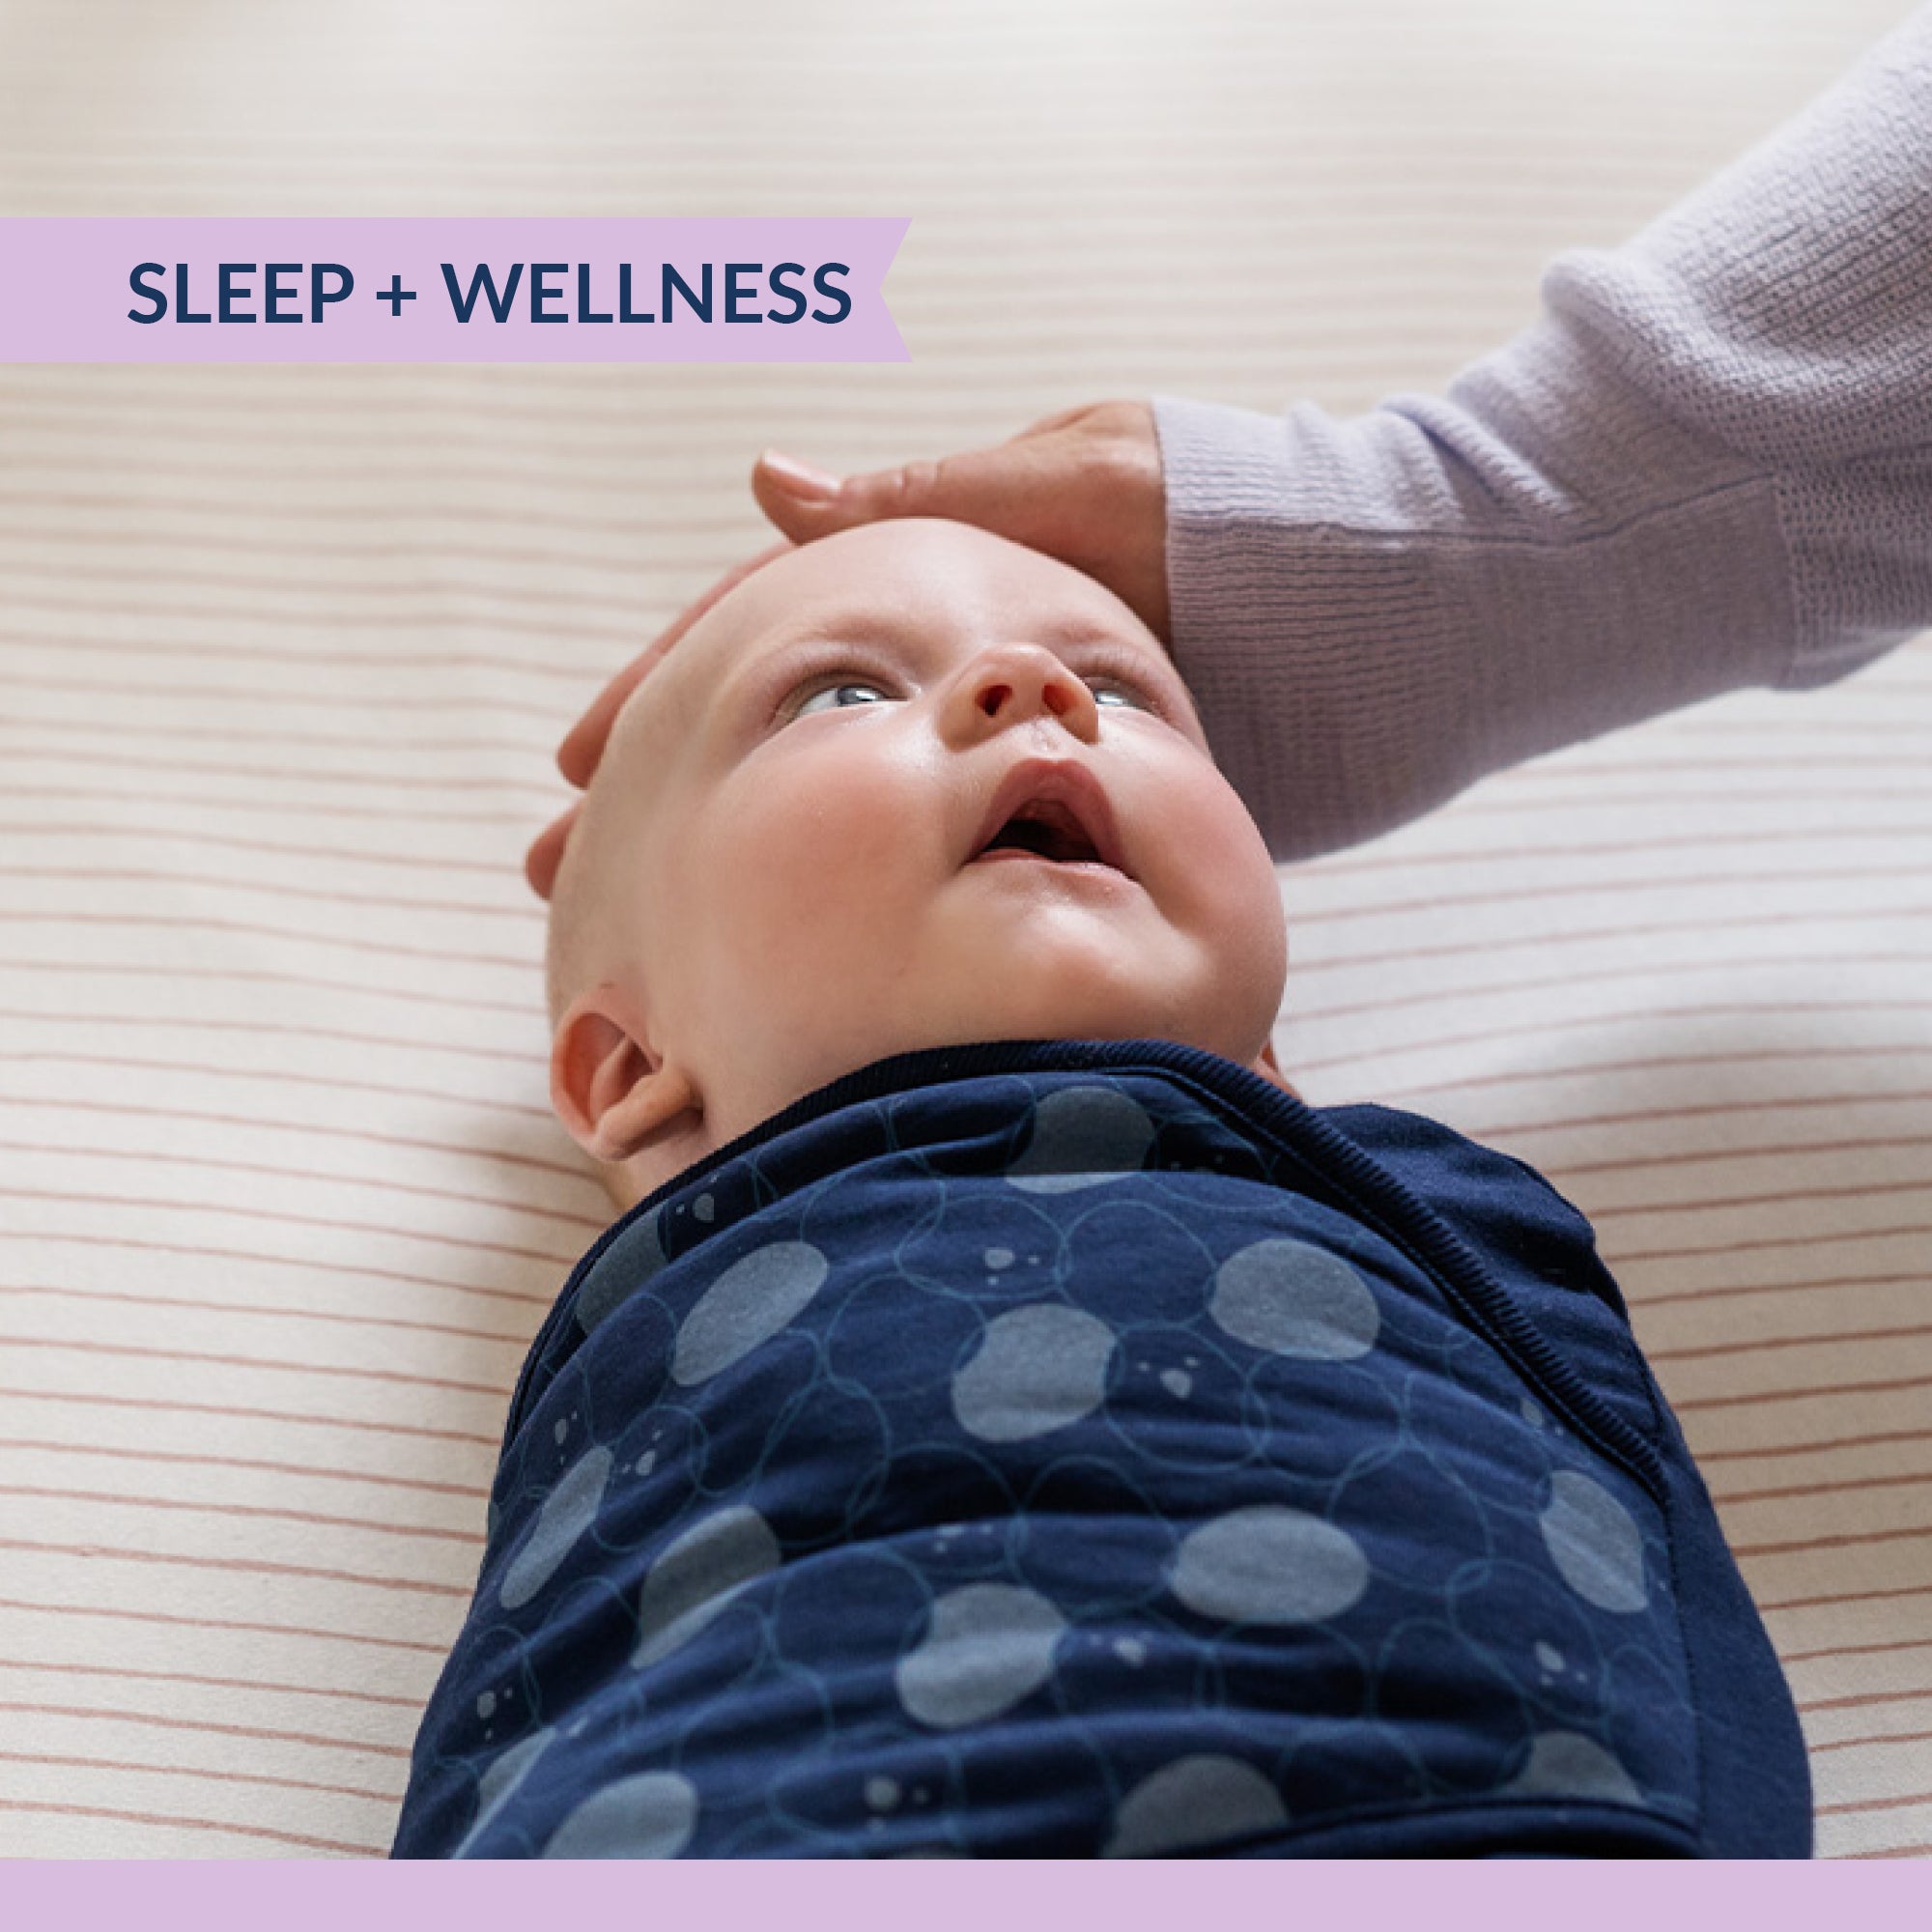 How to Calm an Overtired Baby: Tips to Soothe an Overtired Newborn